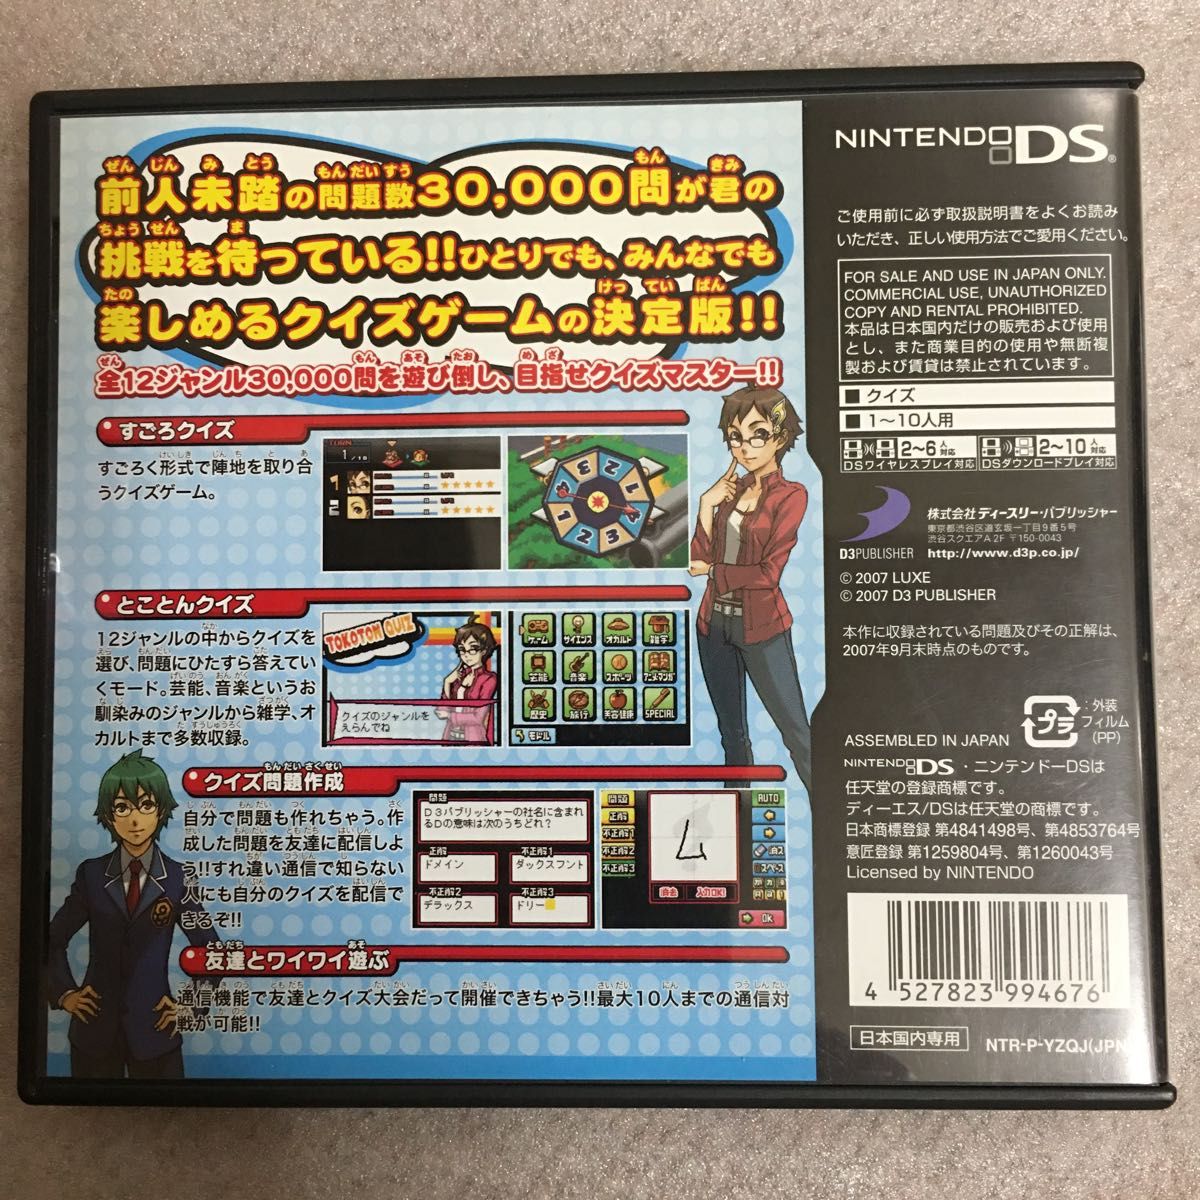 【DS】 SIMPLE DSシリーズ Vol.26 THE クイズ30,000問